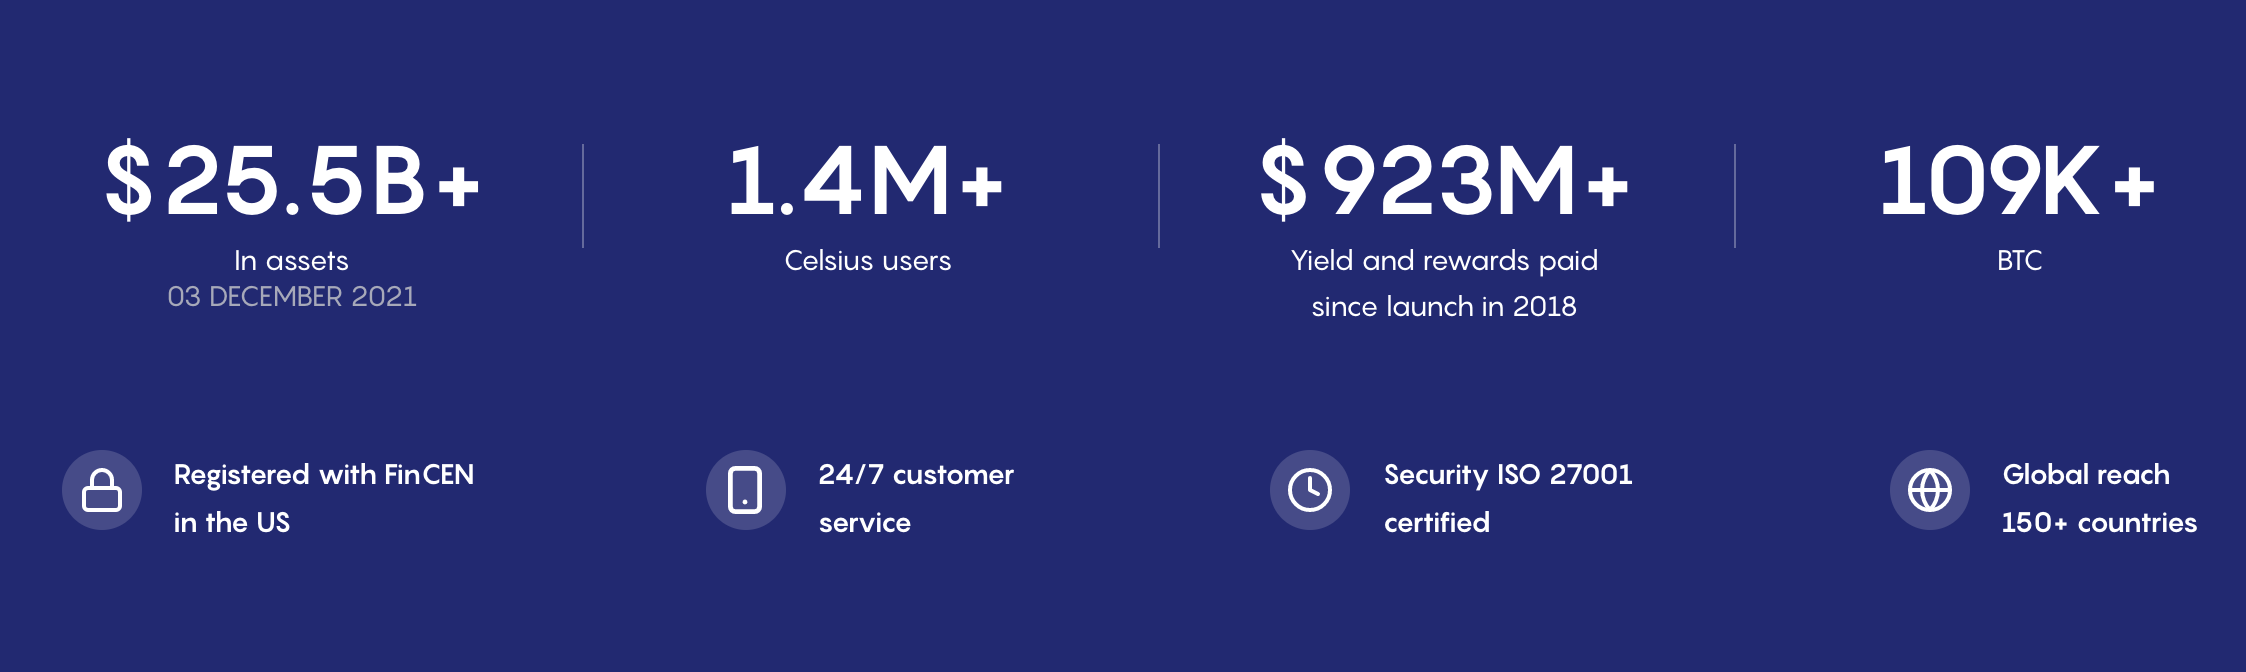 Celsius Network in Numbers